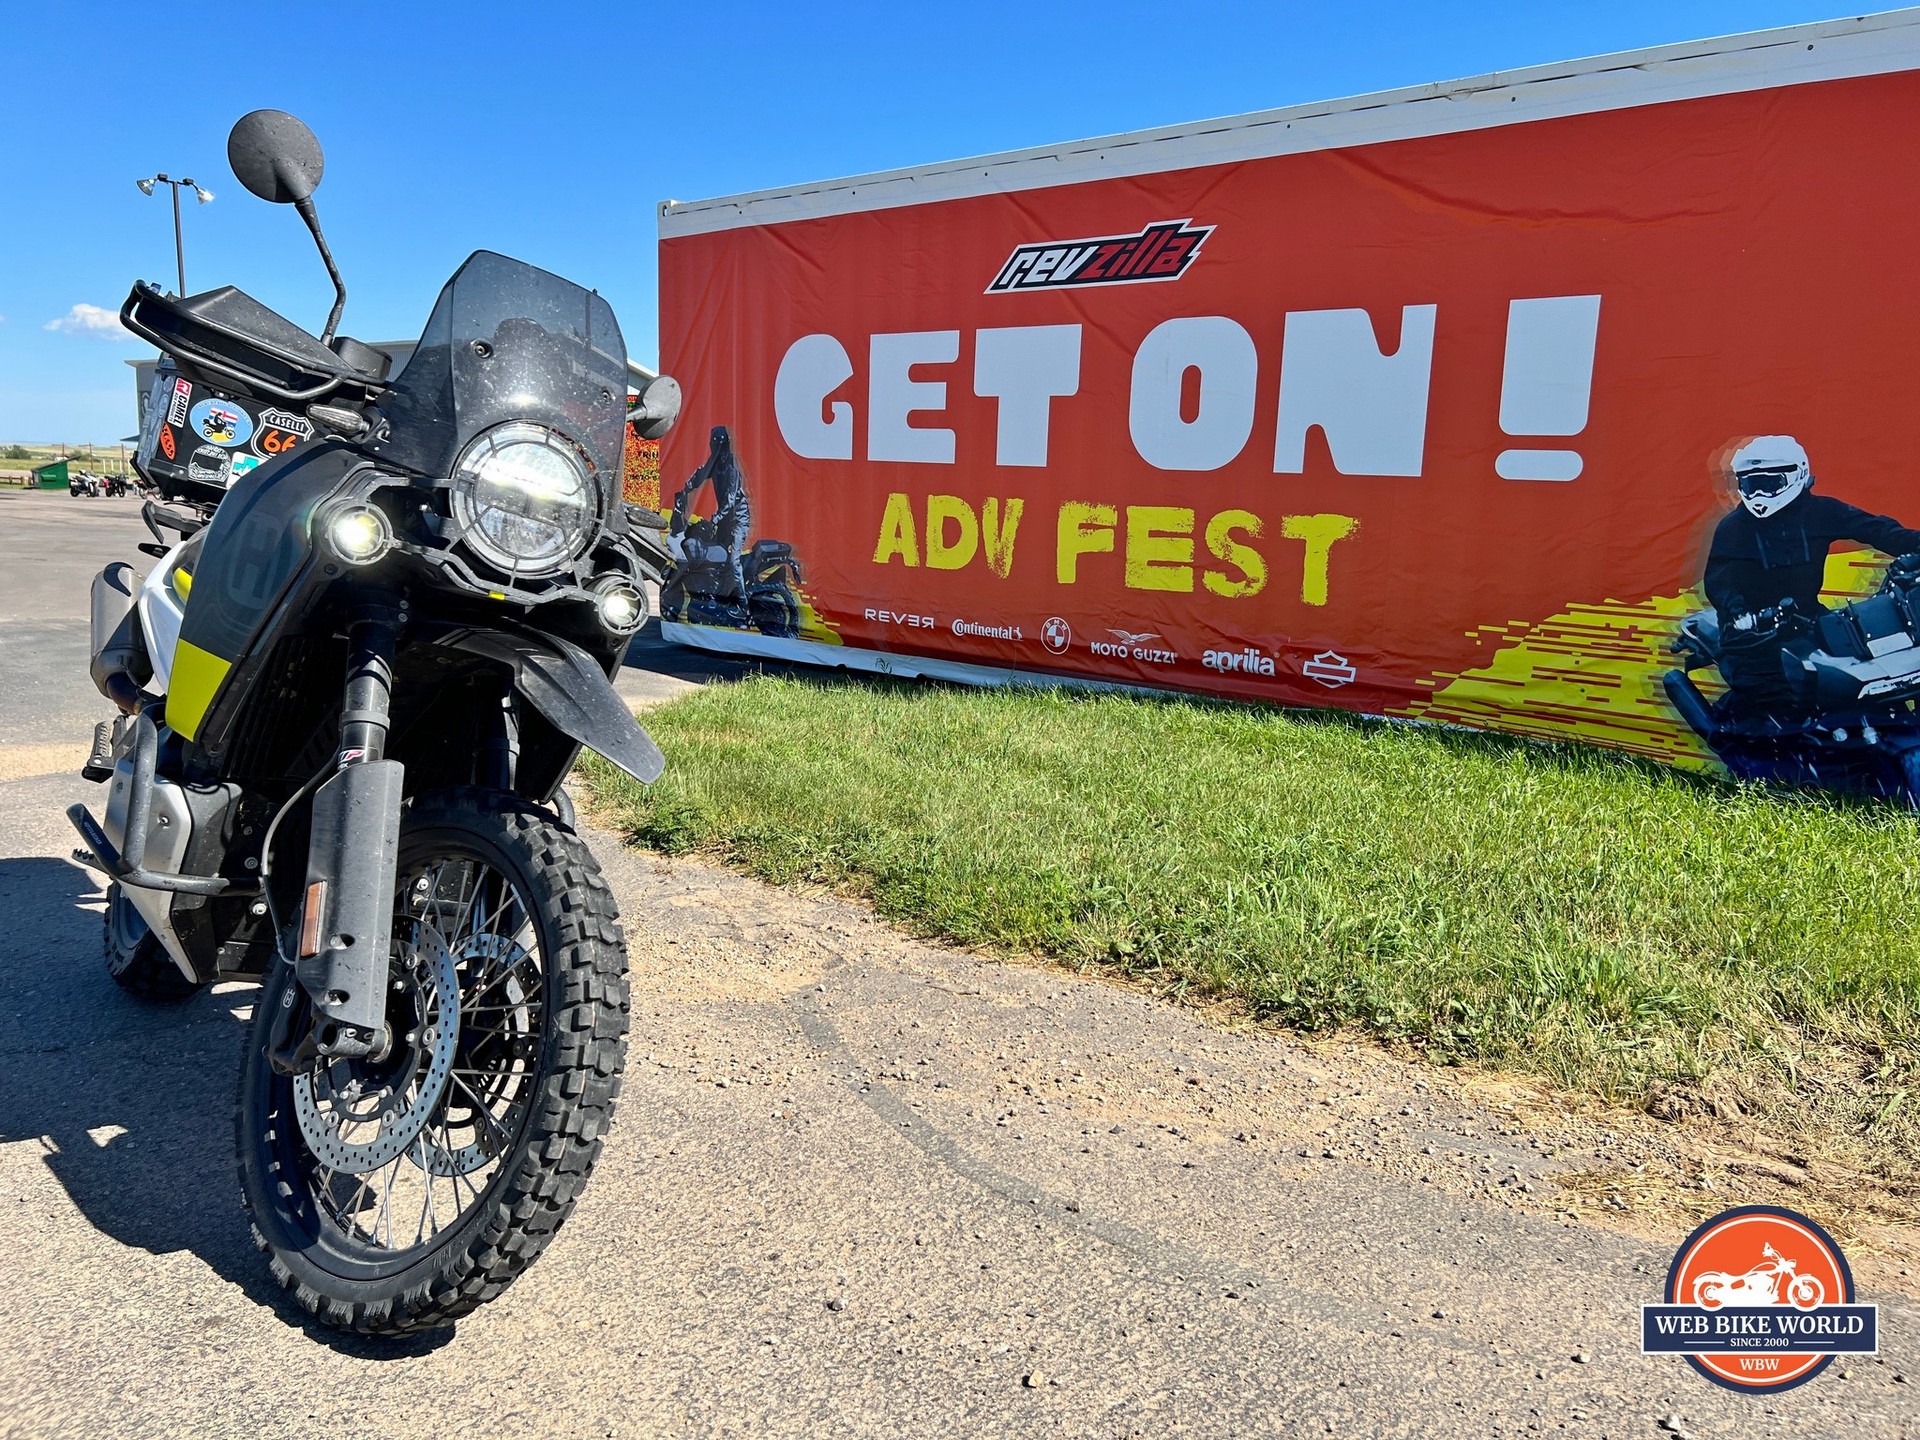 My Norden 901 parked at the welcome sign of the 2022 GET ON! Adventure Fest Sturgis.